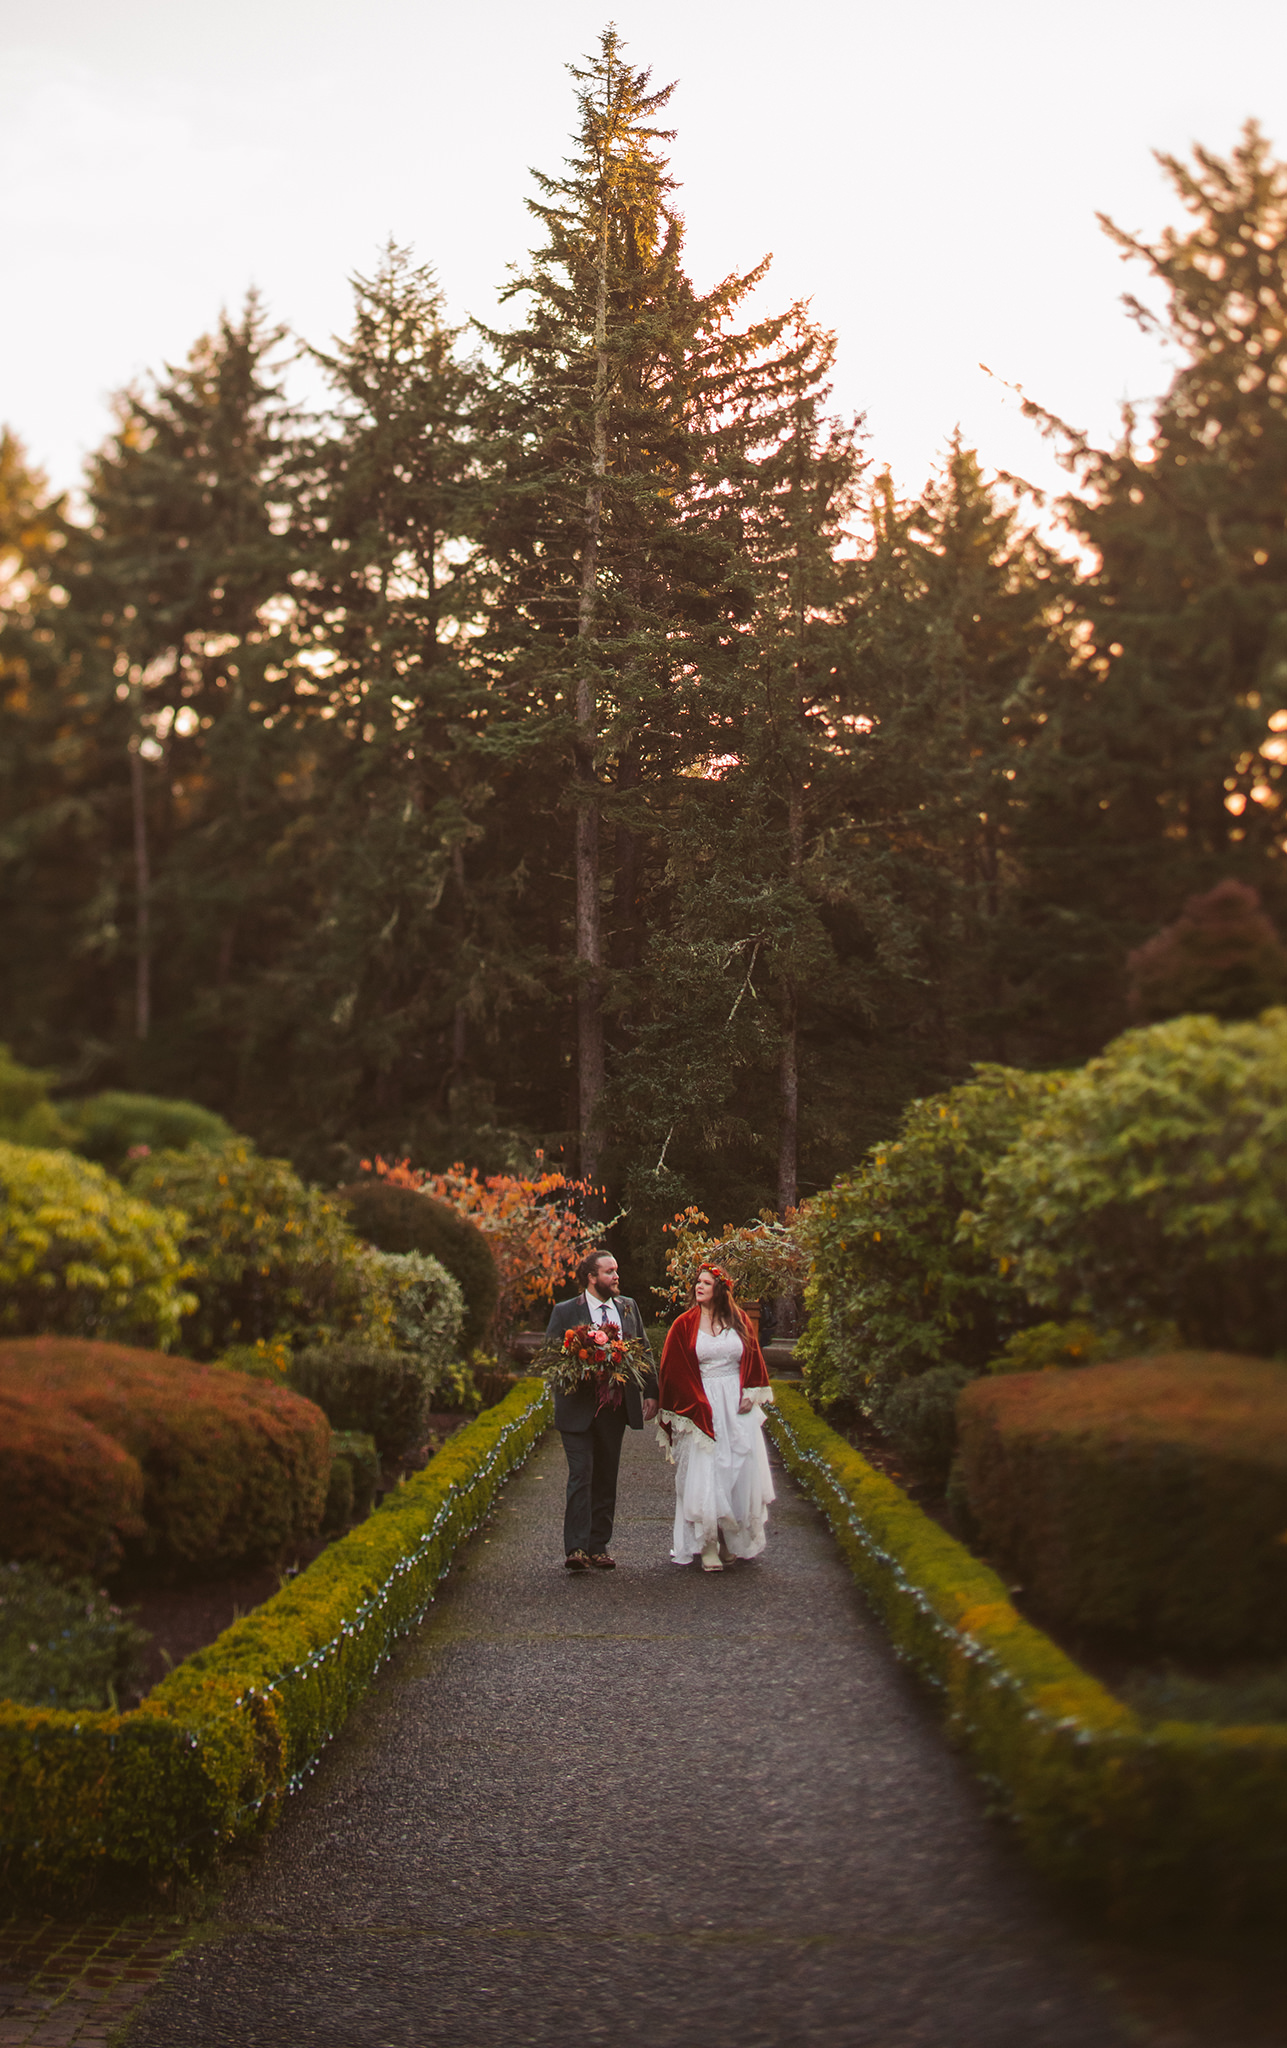 A wedding photo of a bride and groom walking through the gardens at Shore Acres state park